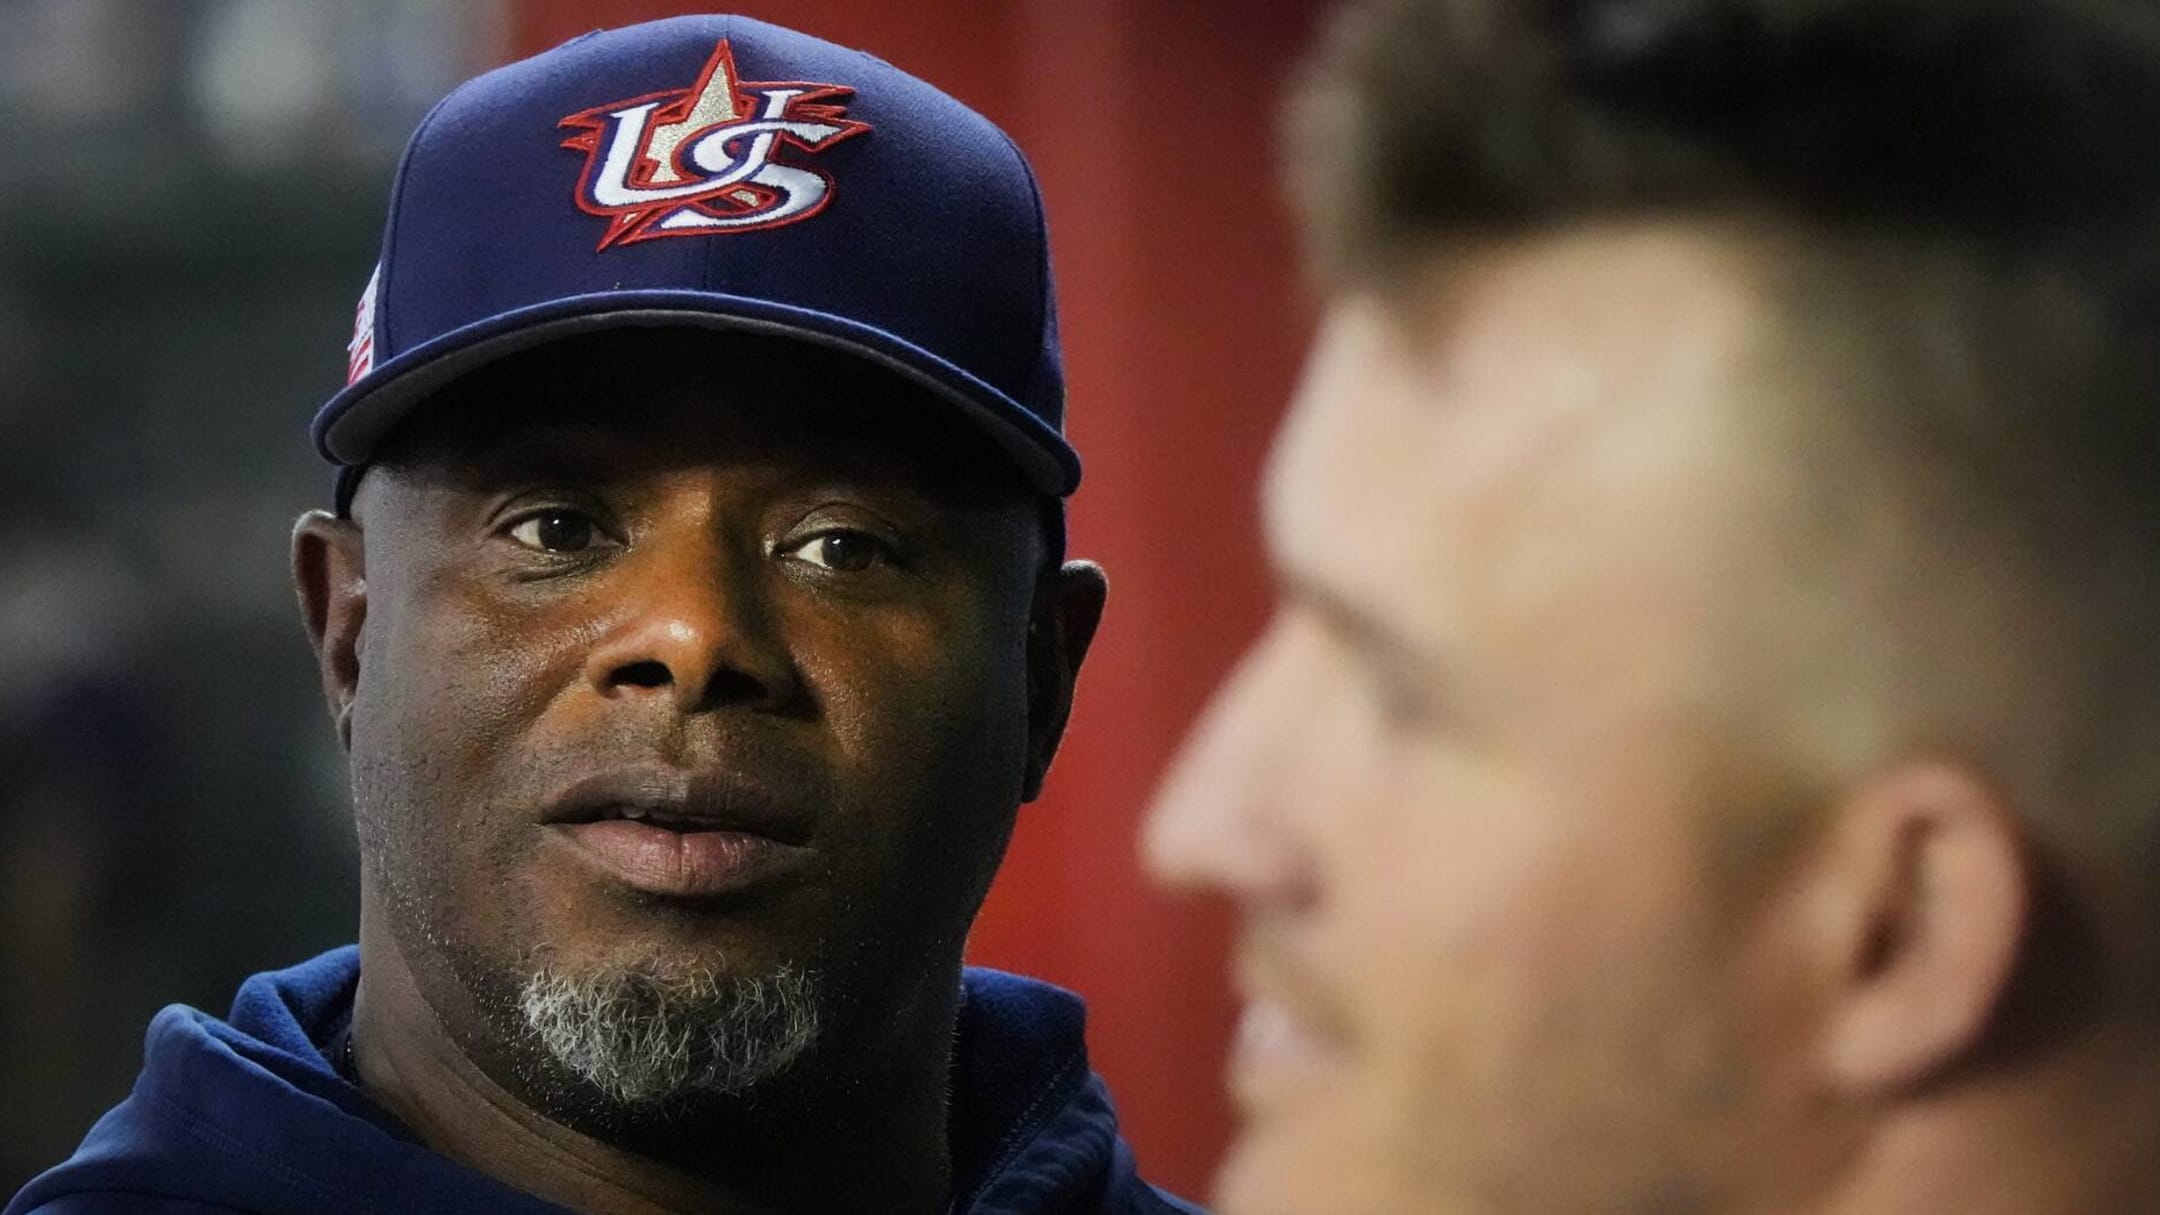 Watch: Ken Griffey Jr. takes BP with Team USA, smashes HR